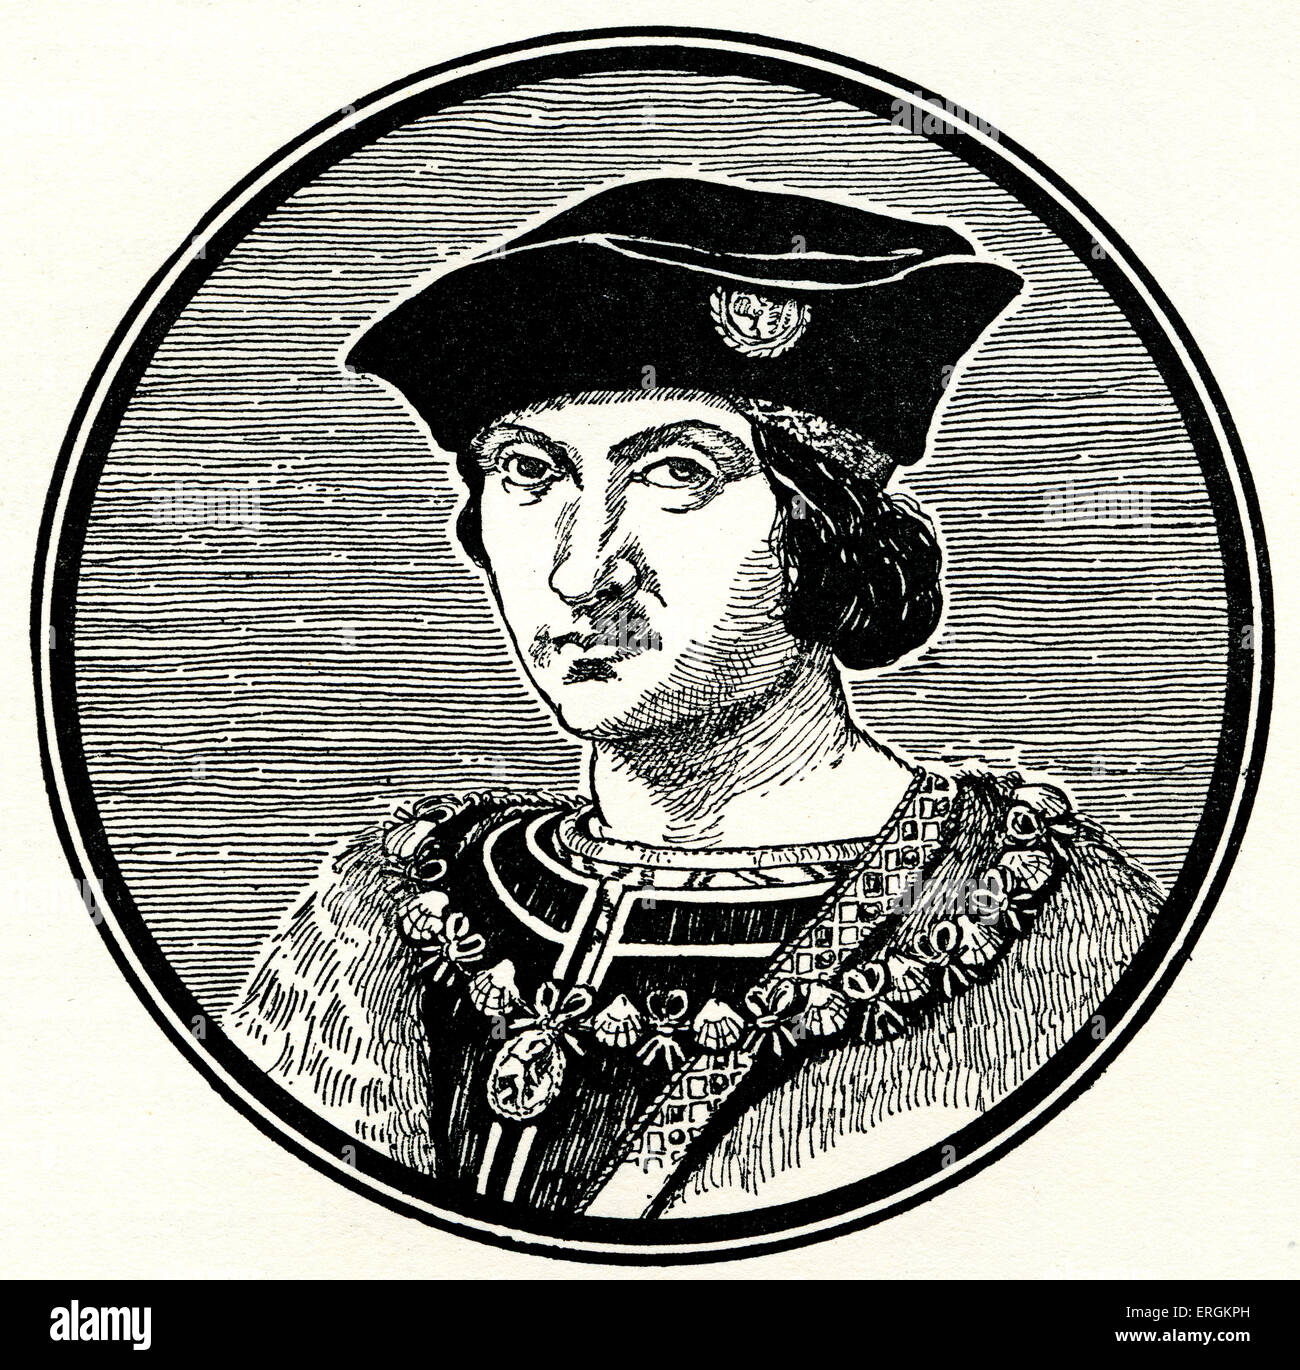 Charles VIII of France (1470 - 1498). Monarch of the House of Valois who ruled as King of France from 1483 to his death in 1498. Based on work by Andrea Solari (1460–1524). Herbert Norris artist died 1950 - may require copyright clearance Stock Photo